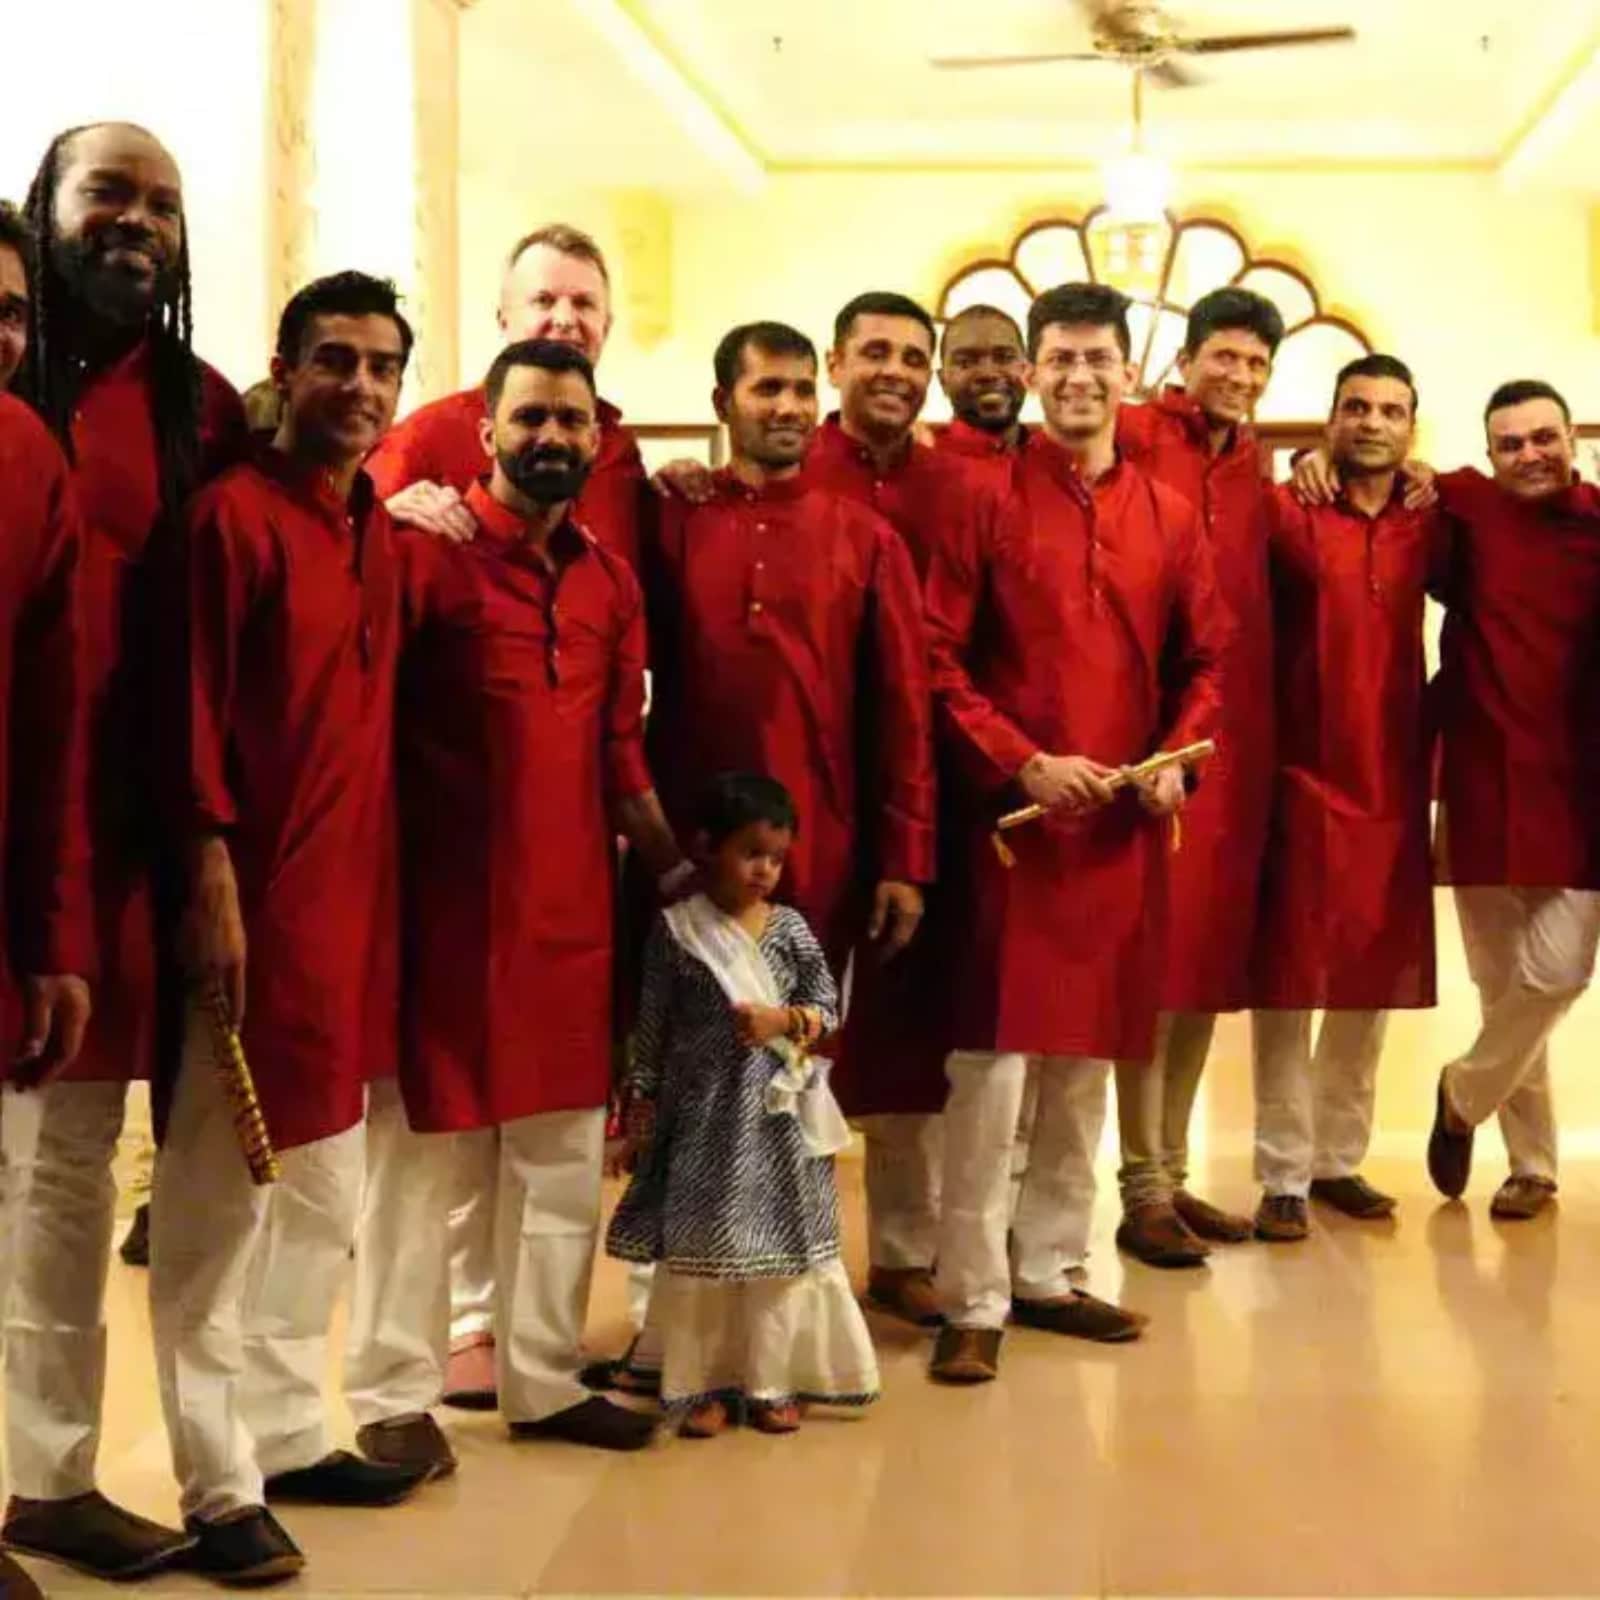 An Indian Christian Wedding - the Best of Two Worlds!